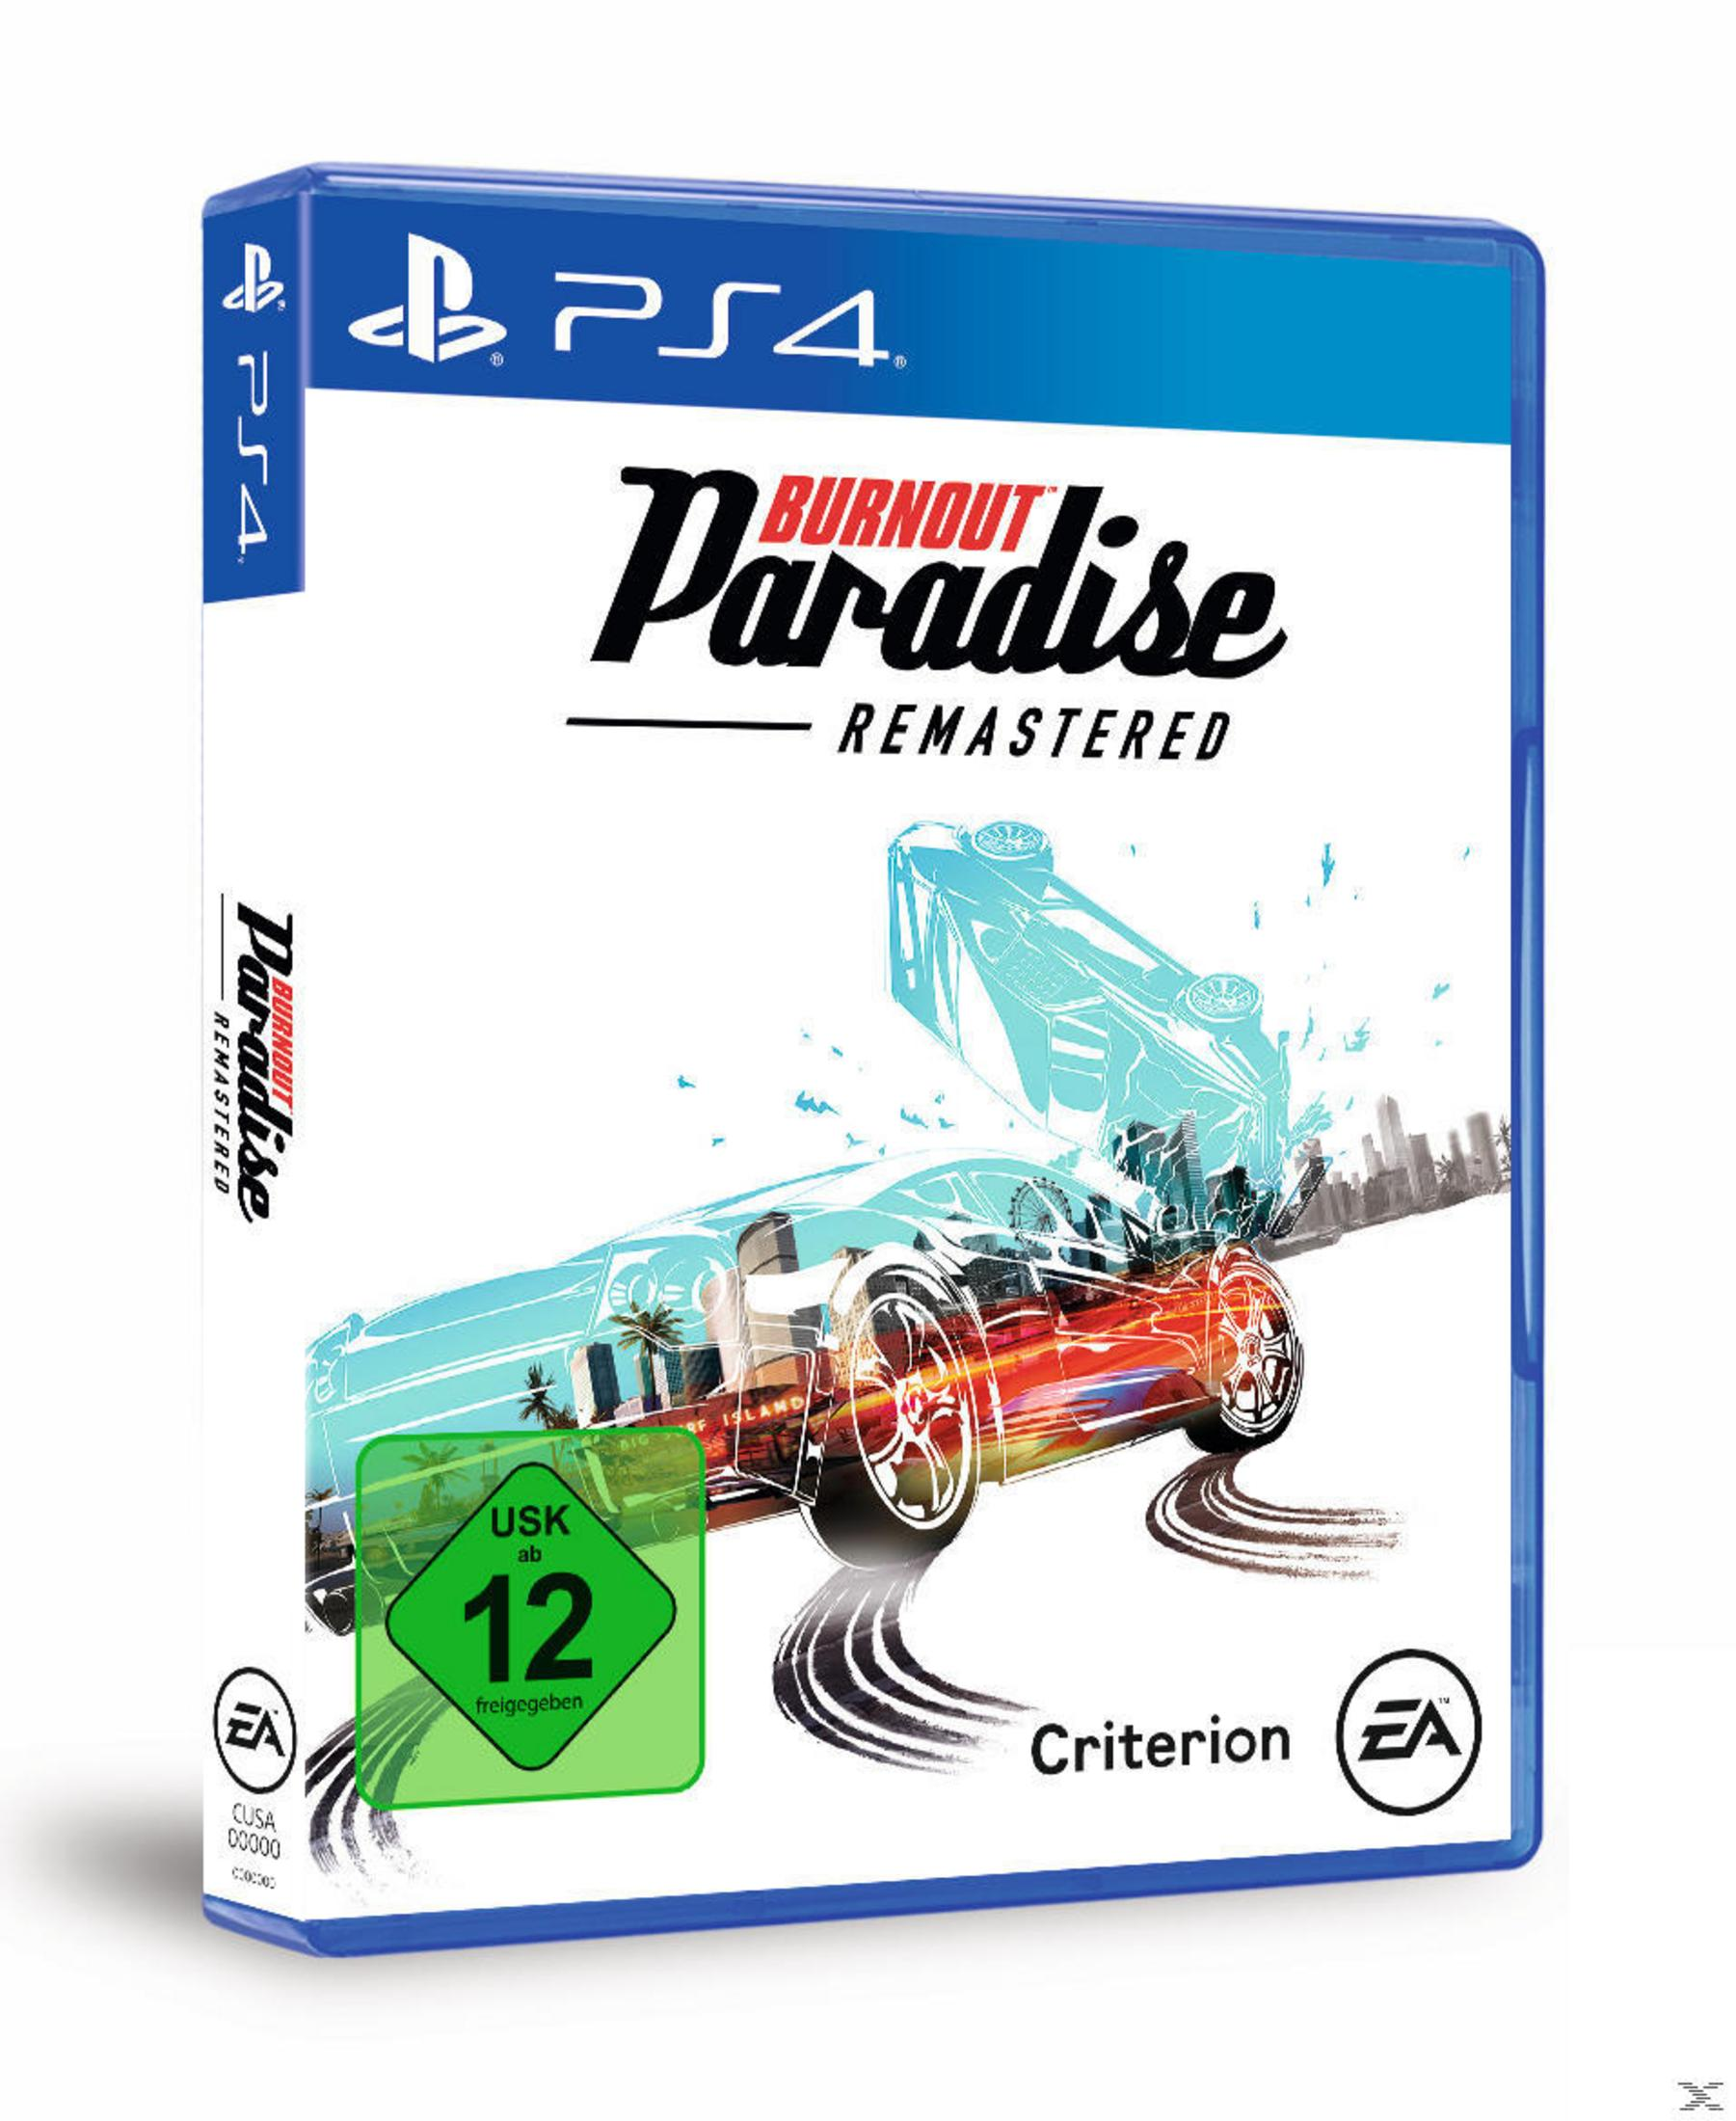 Burnout Paradise PS-4 Remastered - 4] [PlayStation